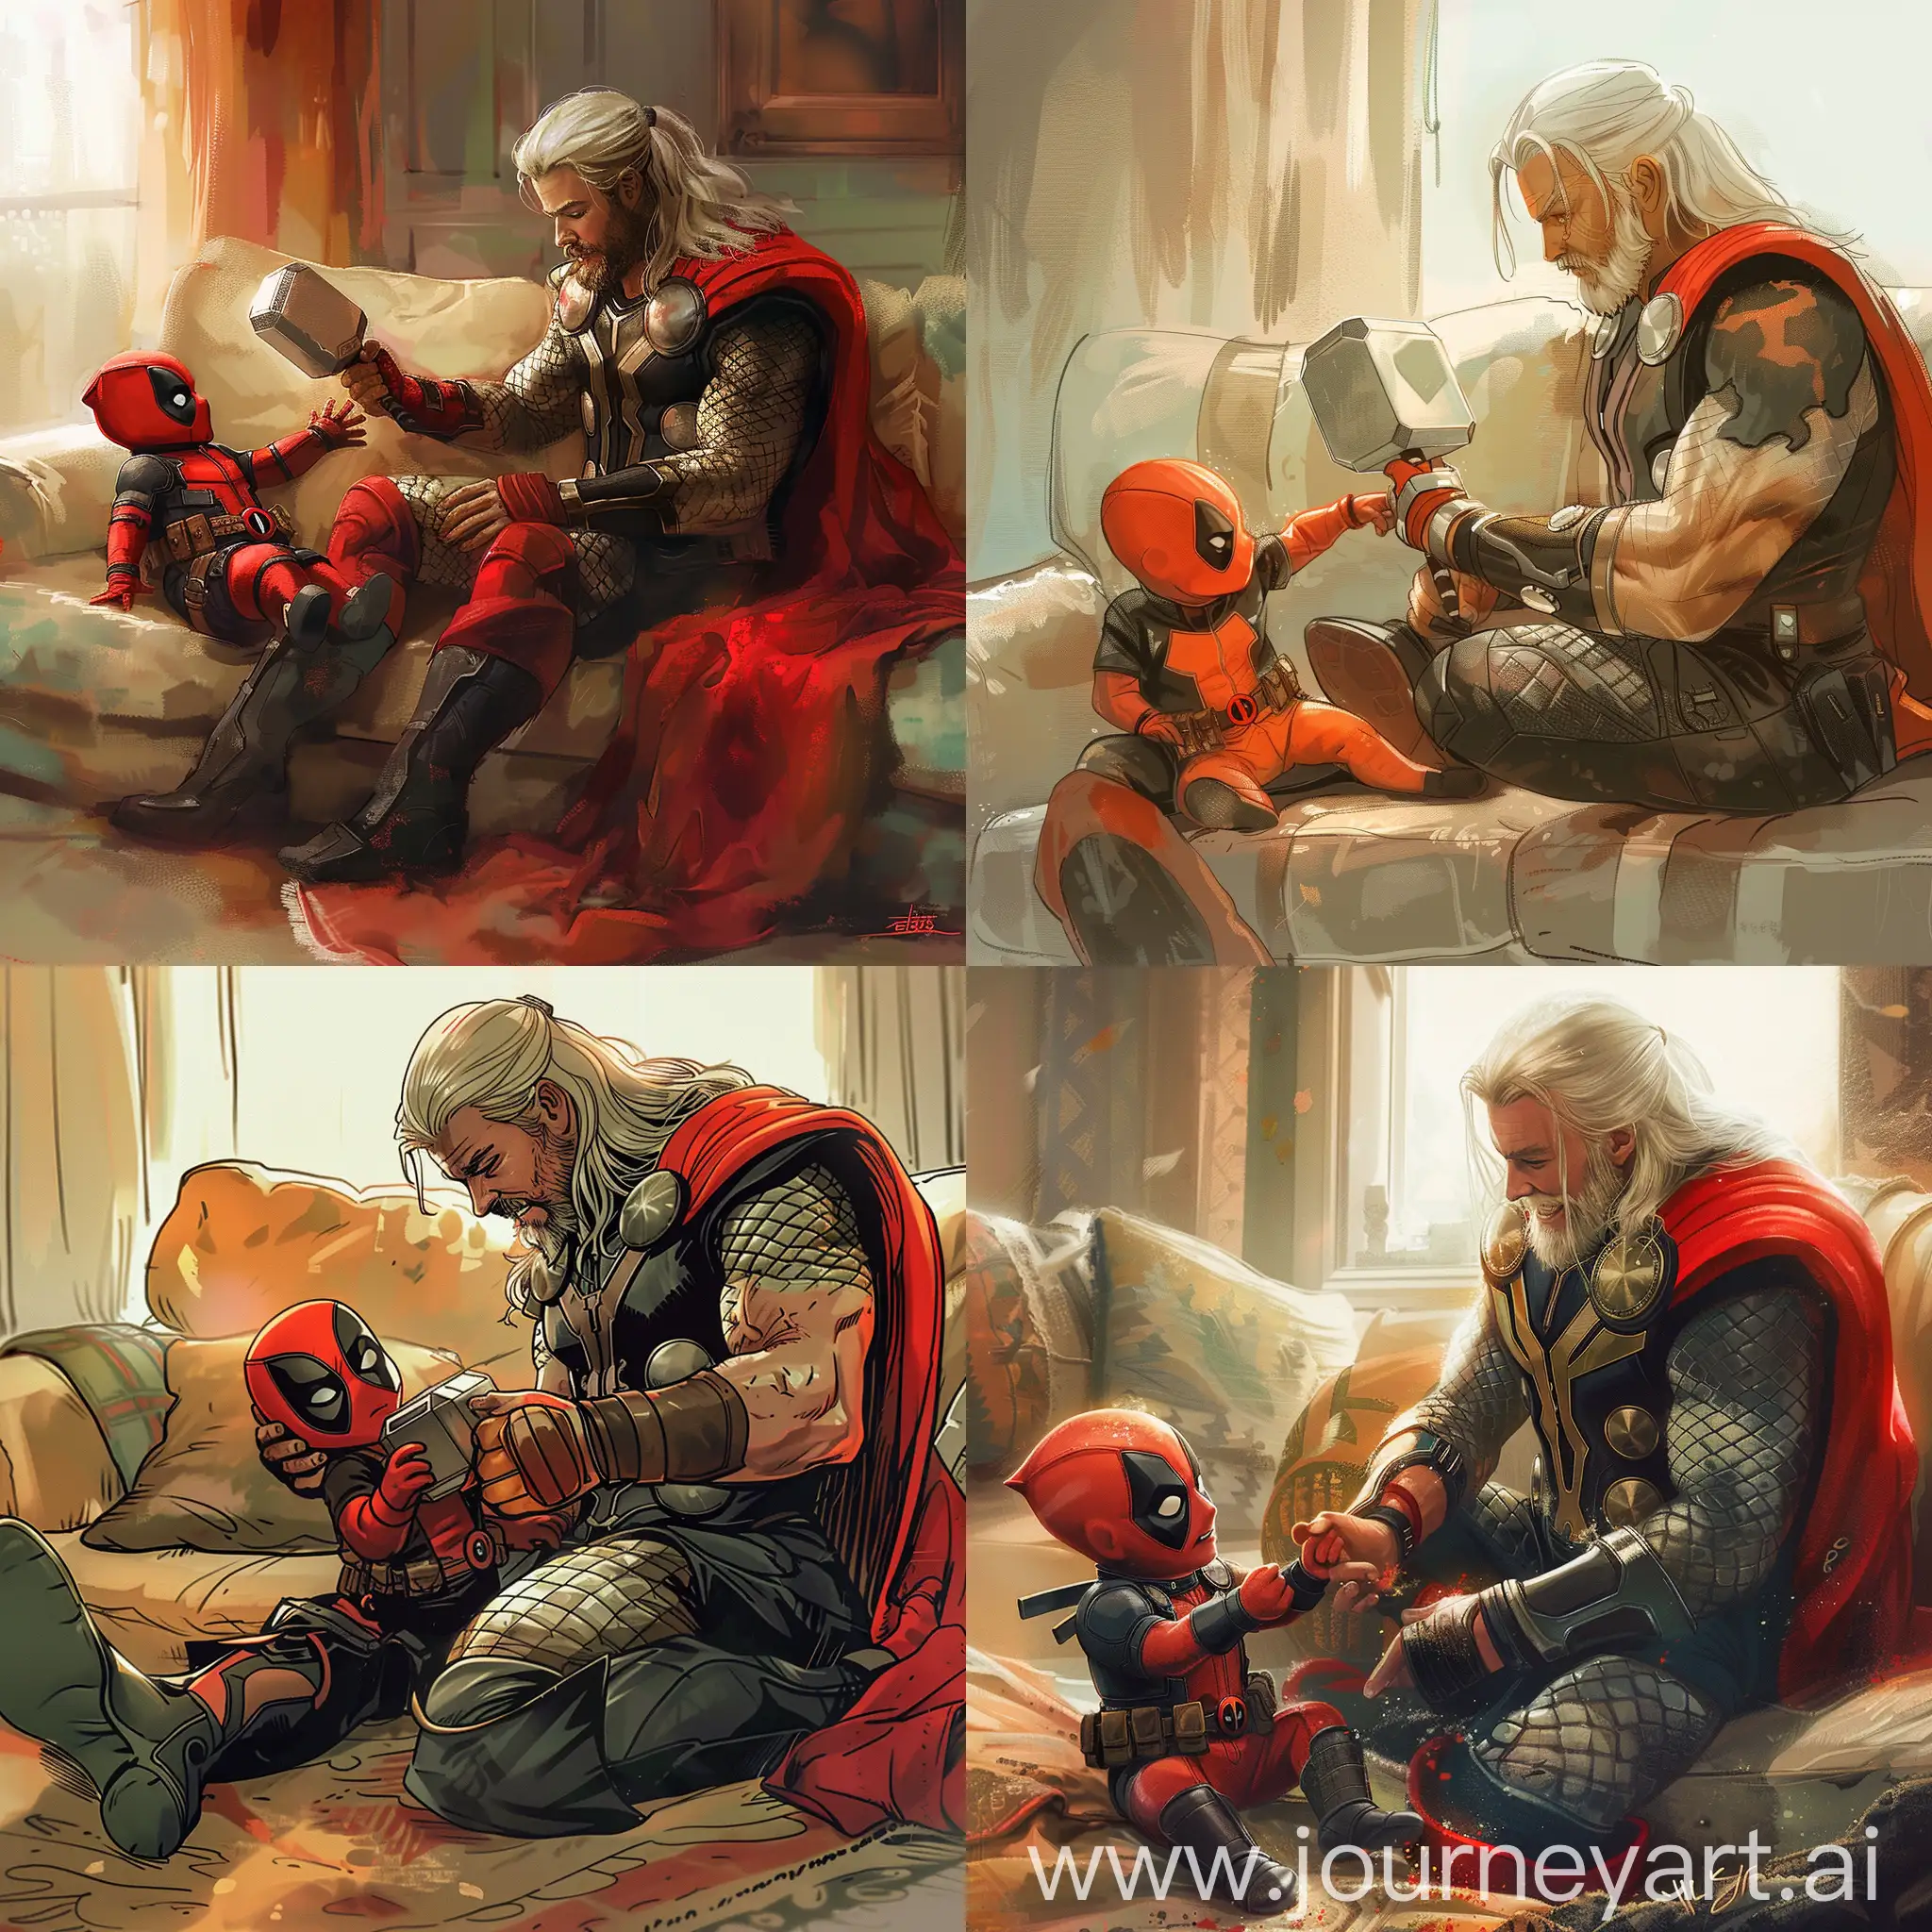 Joyful-Adult-Thor-Playing-with-Baby-Deadpool-on-Couch-in-Daylight